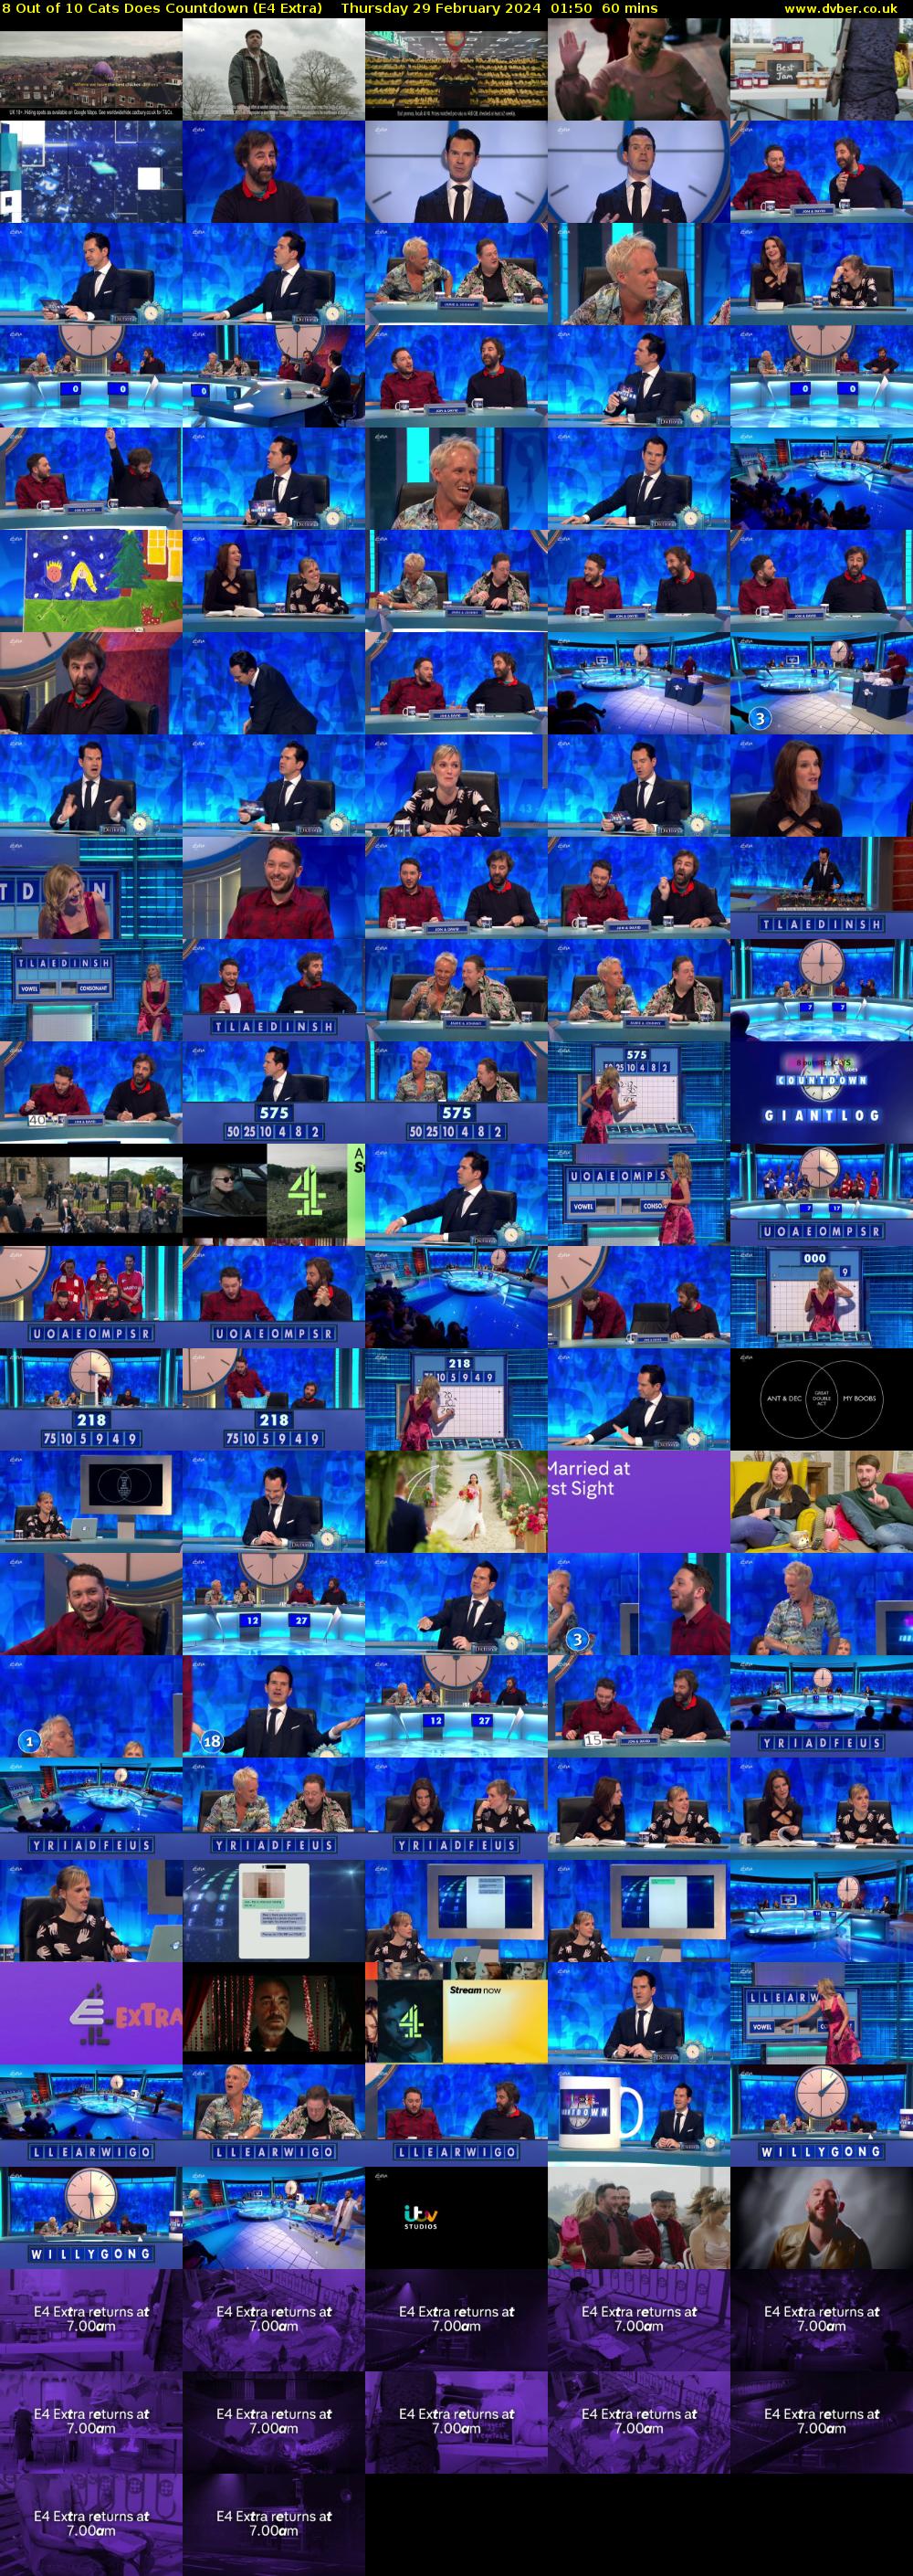 8 Out of 10 Cats Does Countdown (E4 Extra) Thursday 29 February 2024 01:50 - 02:50